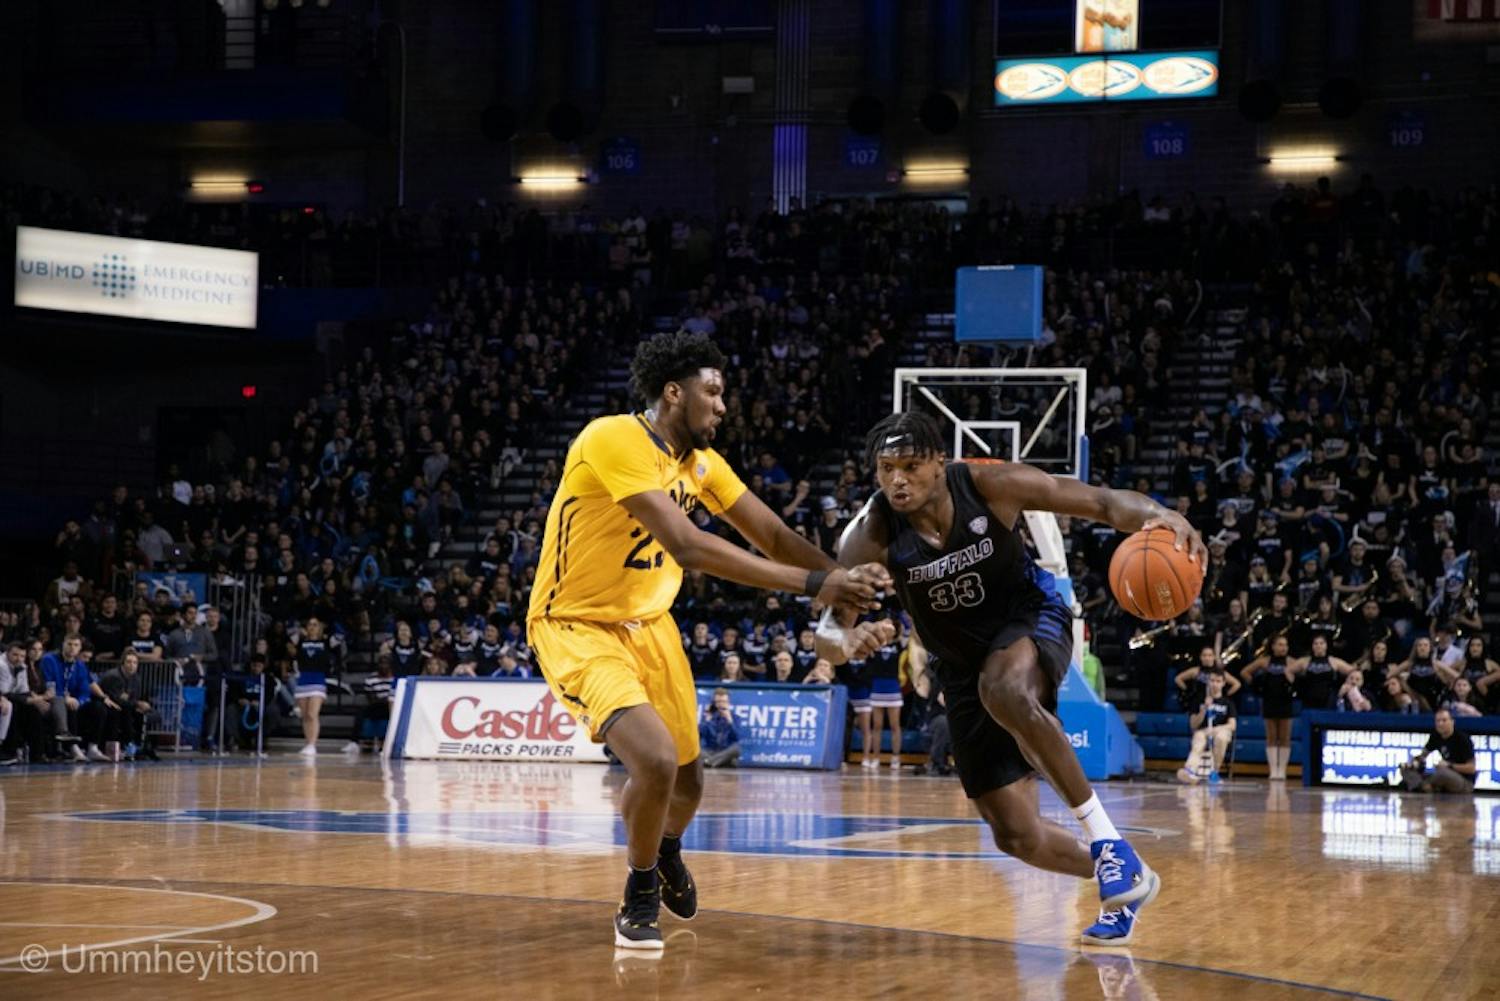 Senior forward Nick Perkins drives for two of his career-high 27 points in front of a sold-out Alumni Arena on Friday.